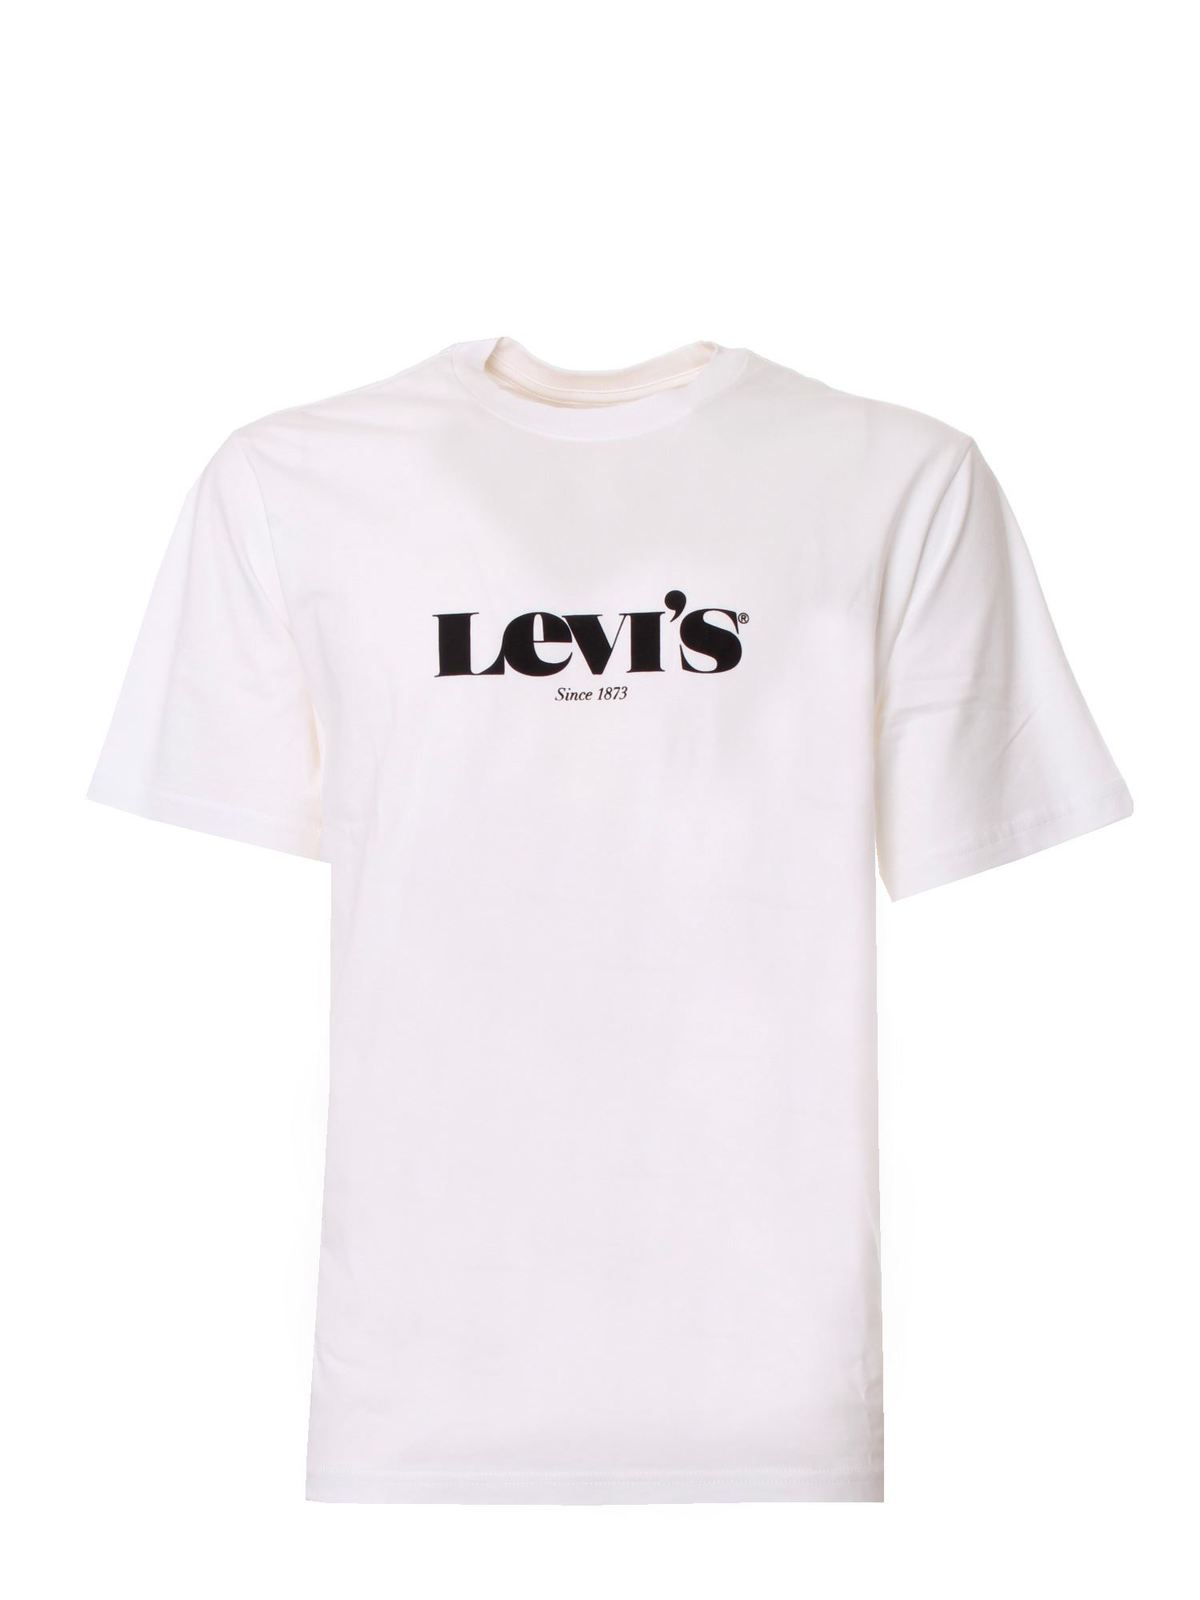 LEVI'S LOGO PRINTED T-SHIRT IN WHITE